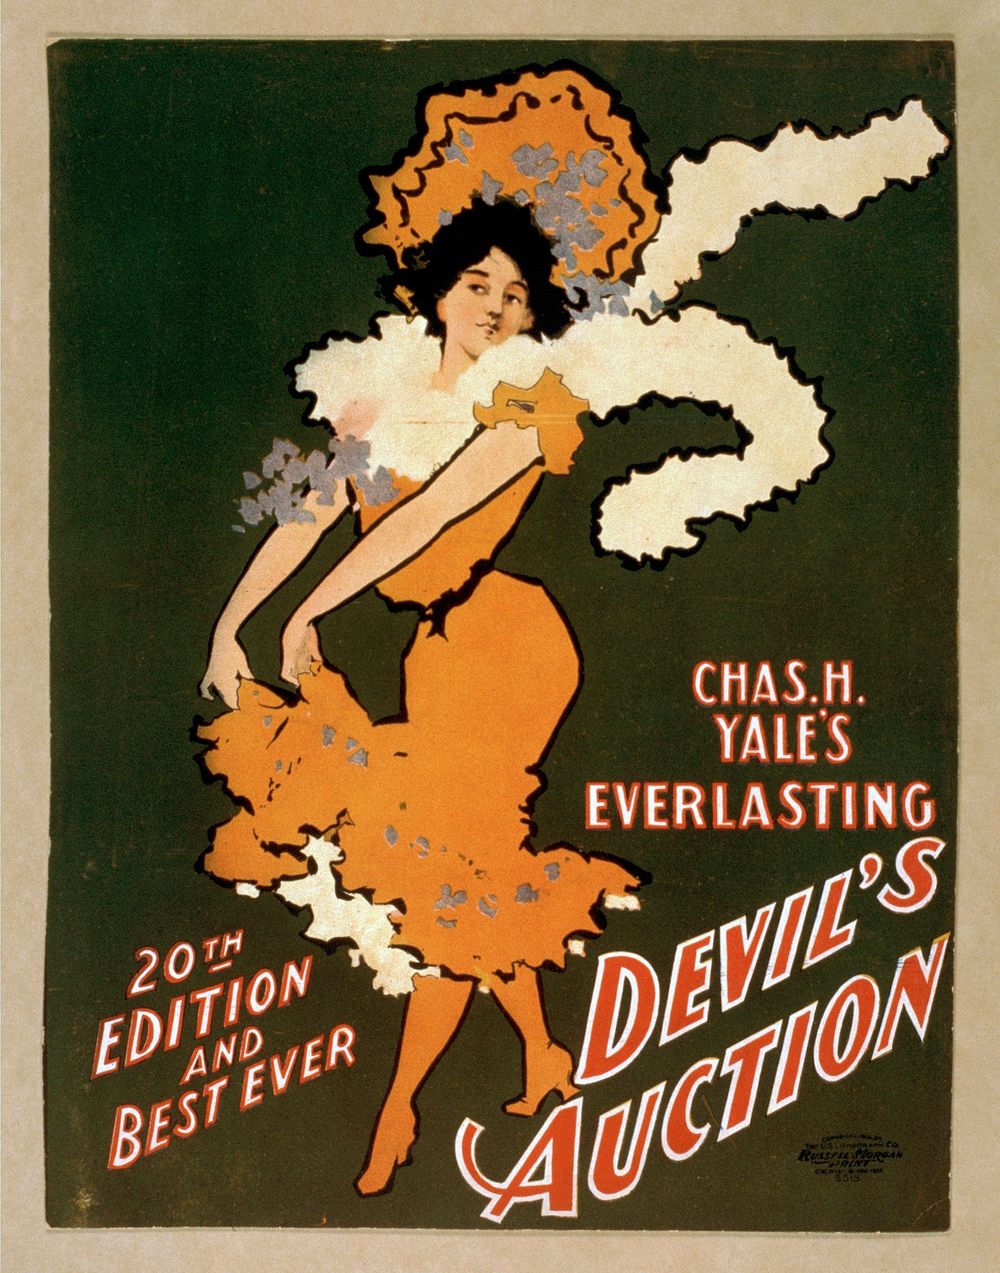 Chas. H. Yale's everlasting Devil's auction 20th edition and best ever.